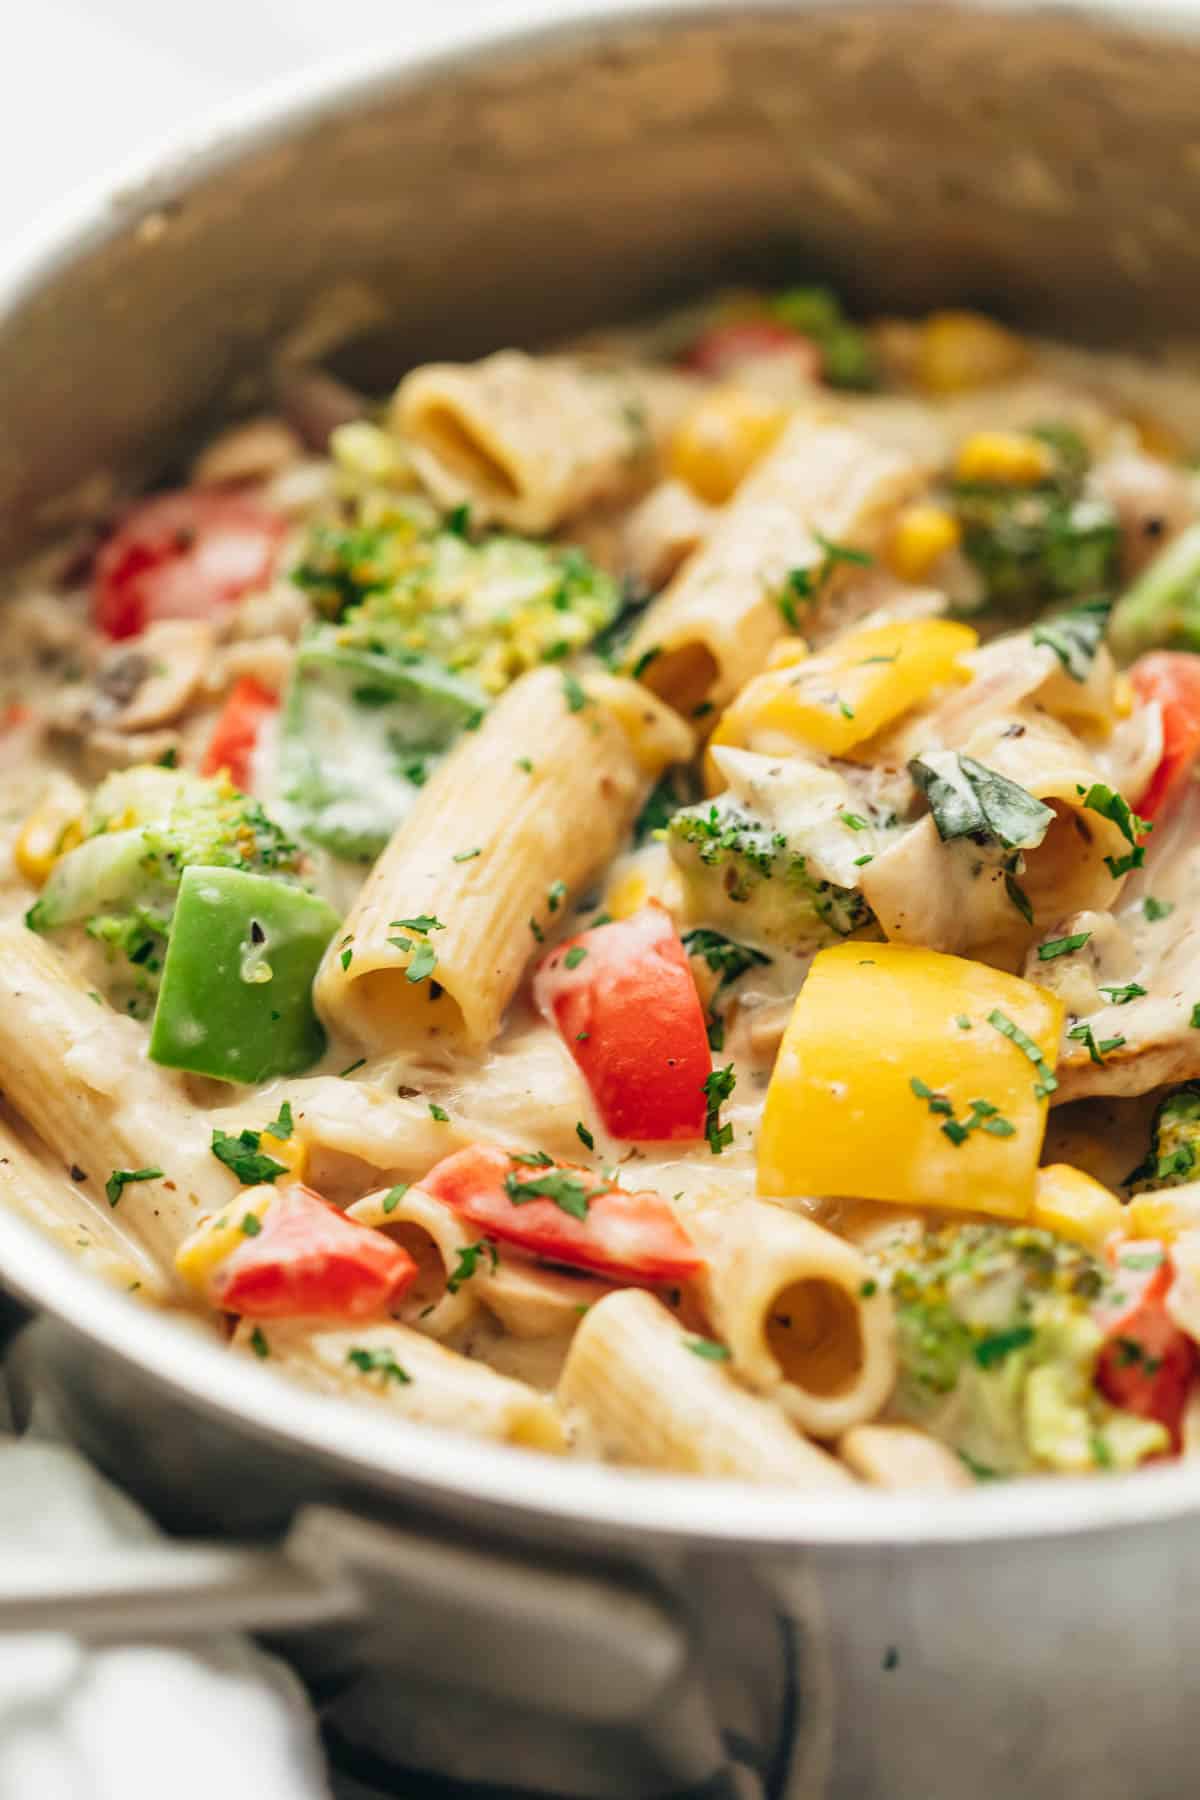 White sauce pasta with vegetables directly from the stovetop in a pan.